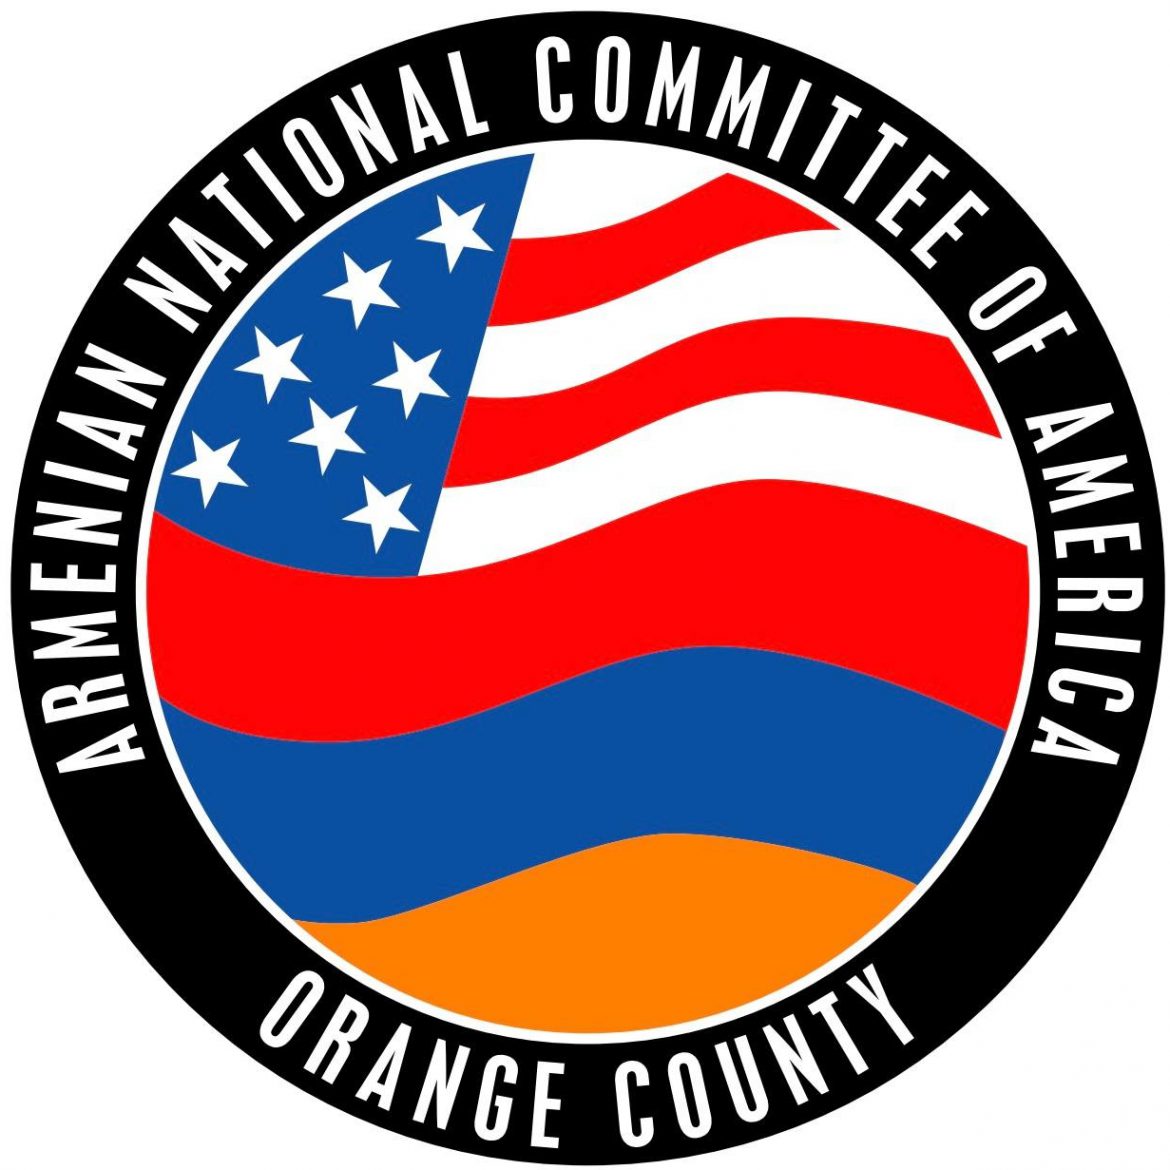 ANCA Orange County expresses outrage at anti-Armenian remarks made at meeting with Irvine Mayor